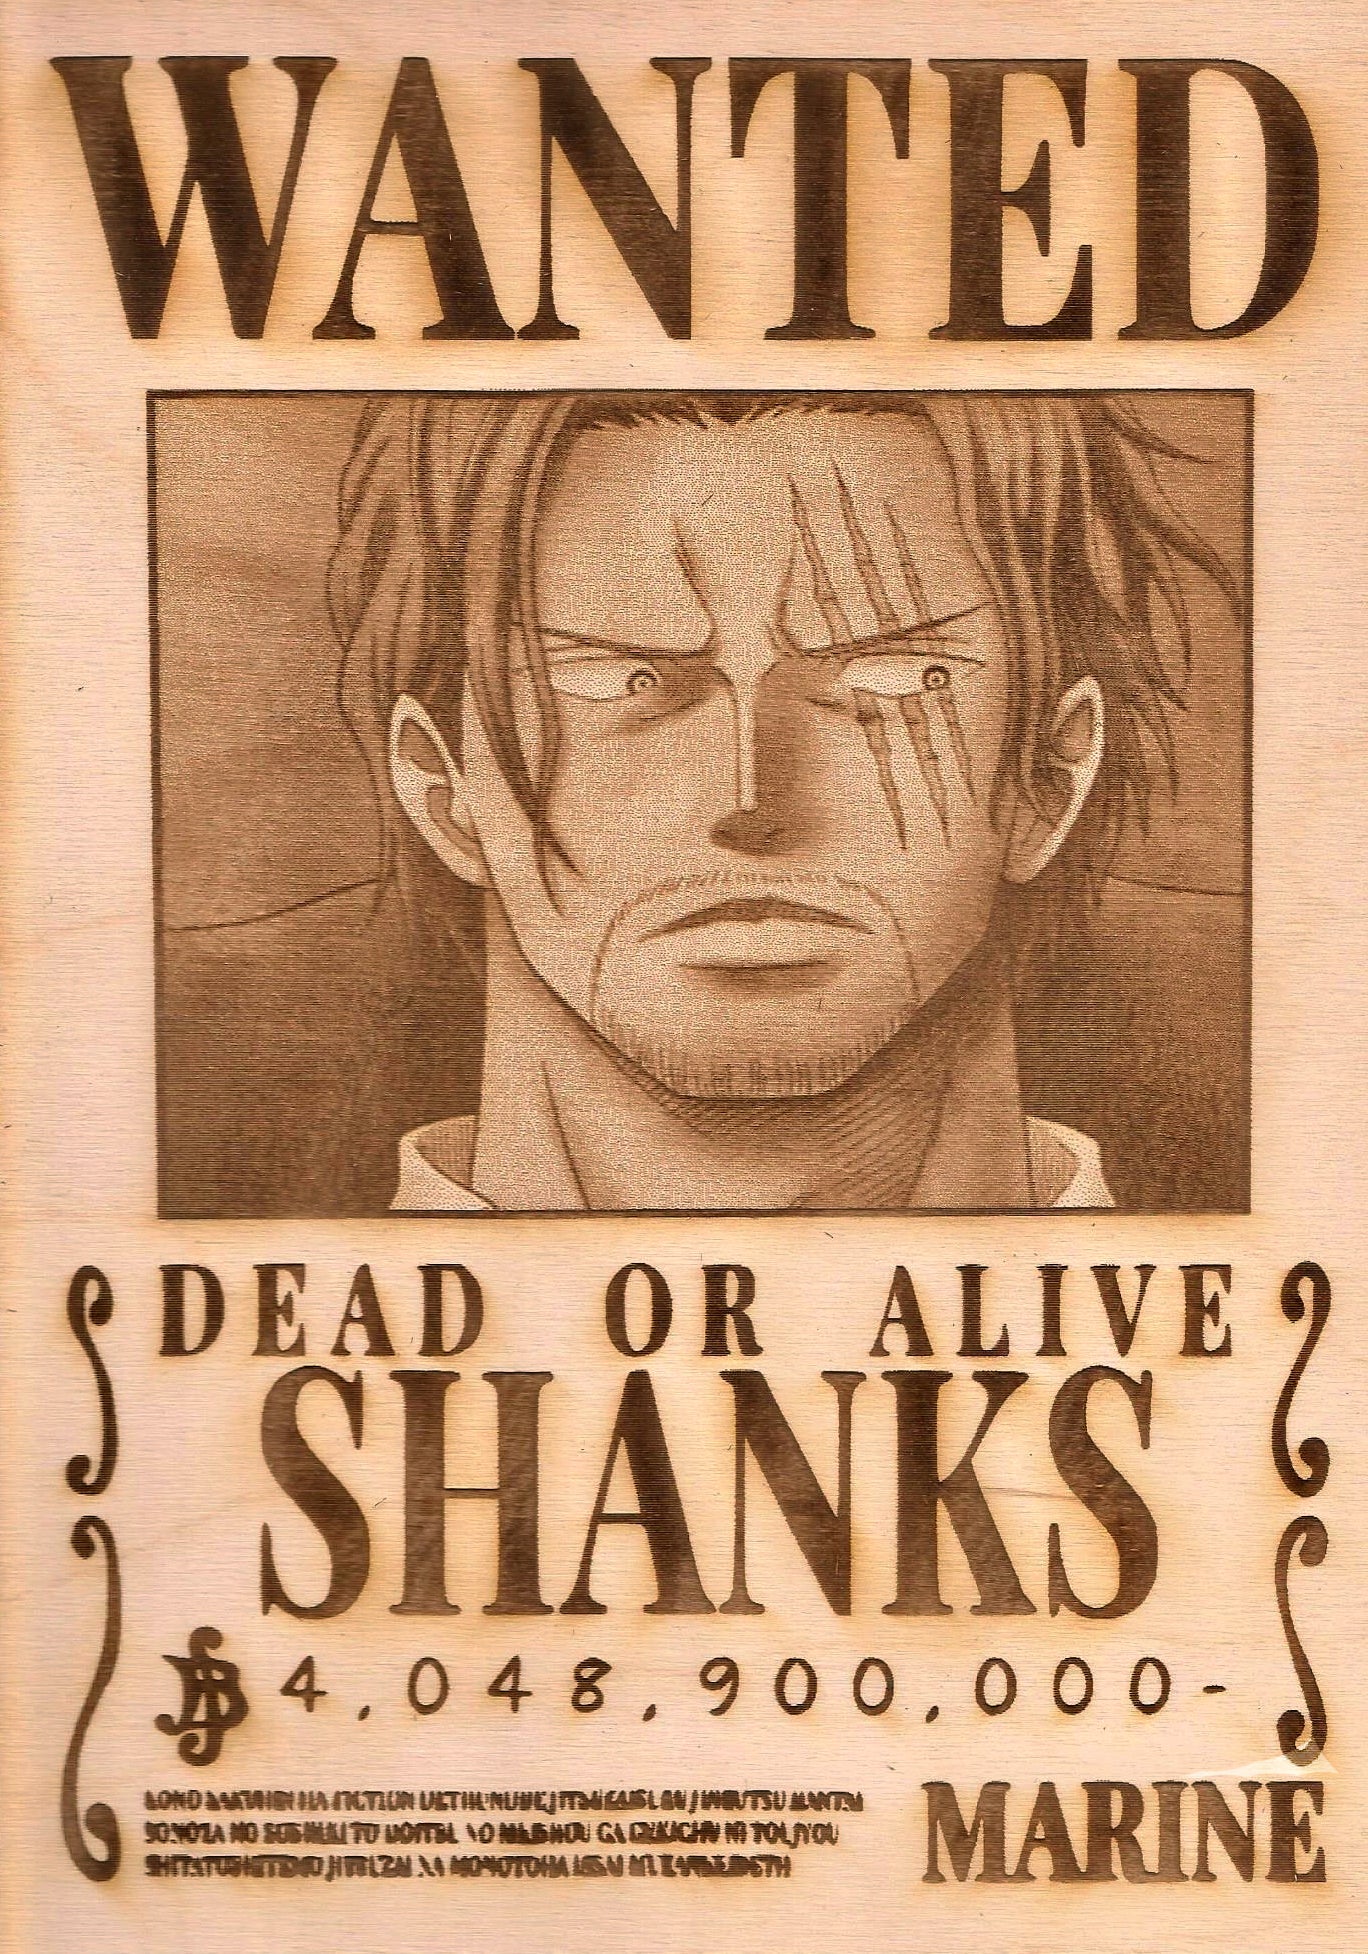 One Piece - Shanks Wanted Poster - TantrumCollectibles.com